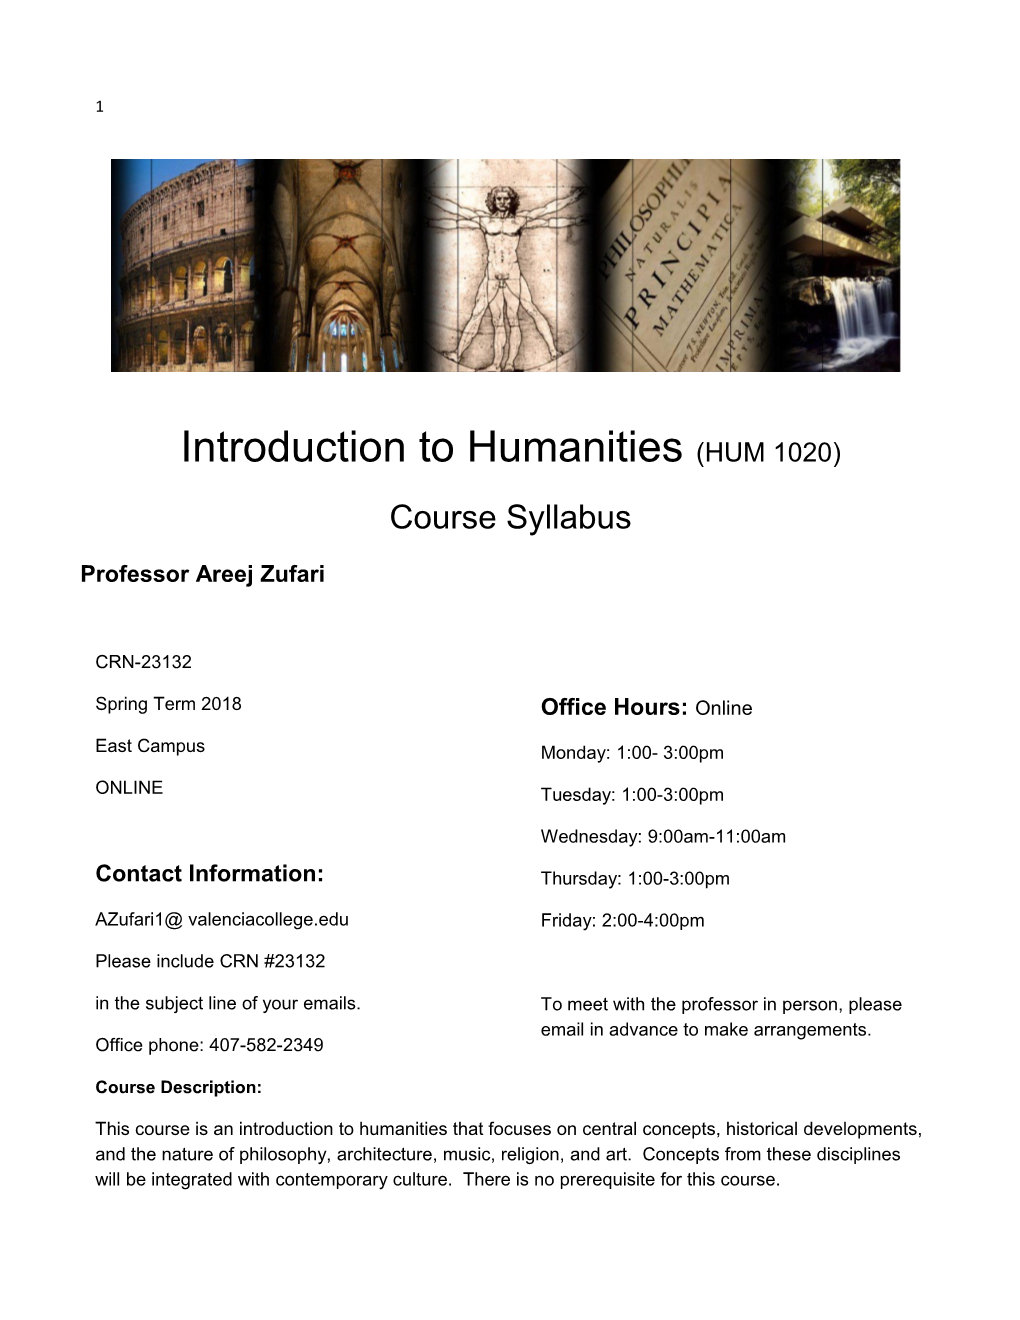 Introduction to Humanities (HUM 1020)